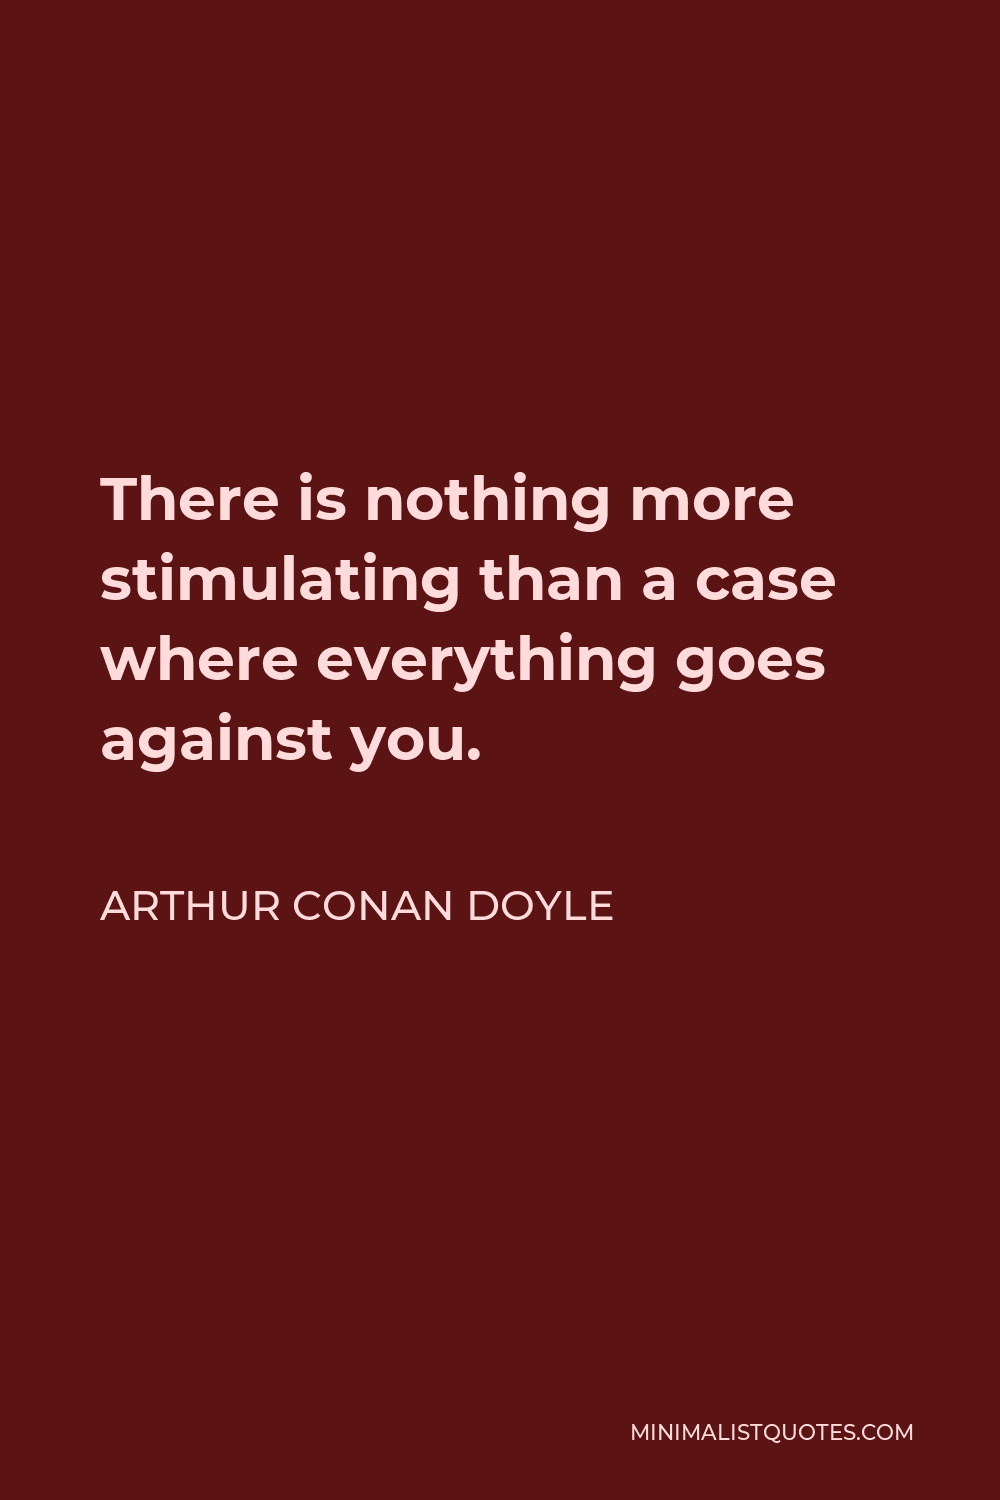 Arthur Conan Doyle Quote - There is nothing more stimulating than a case where everything goes against you.